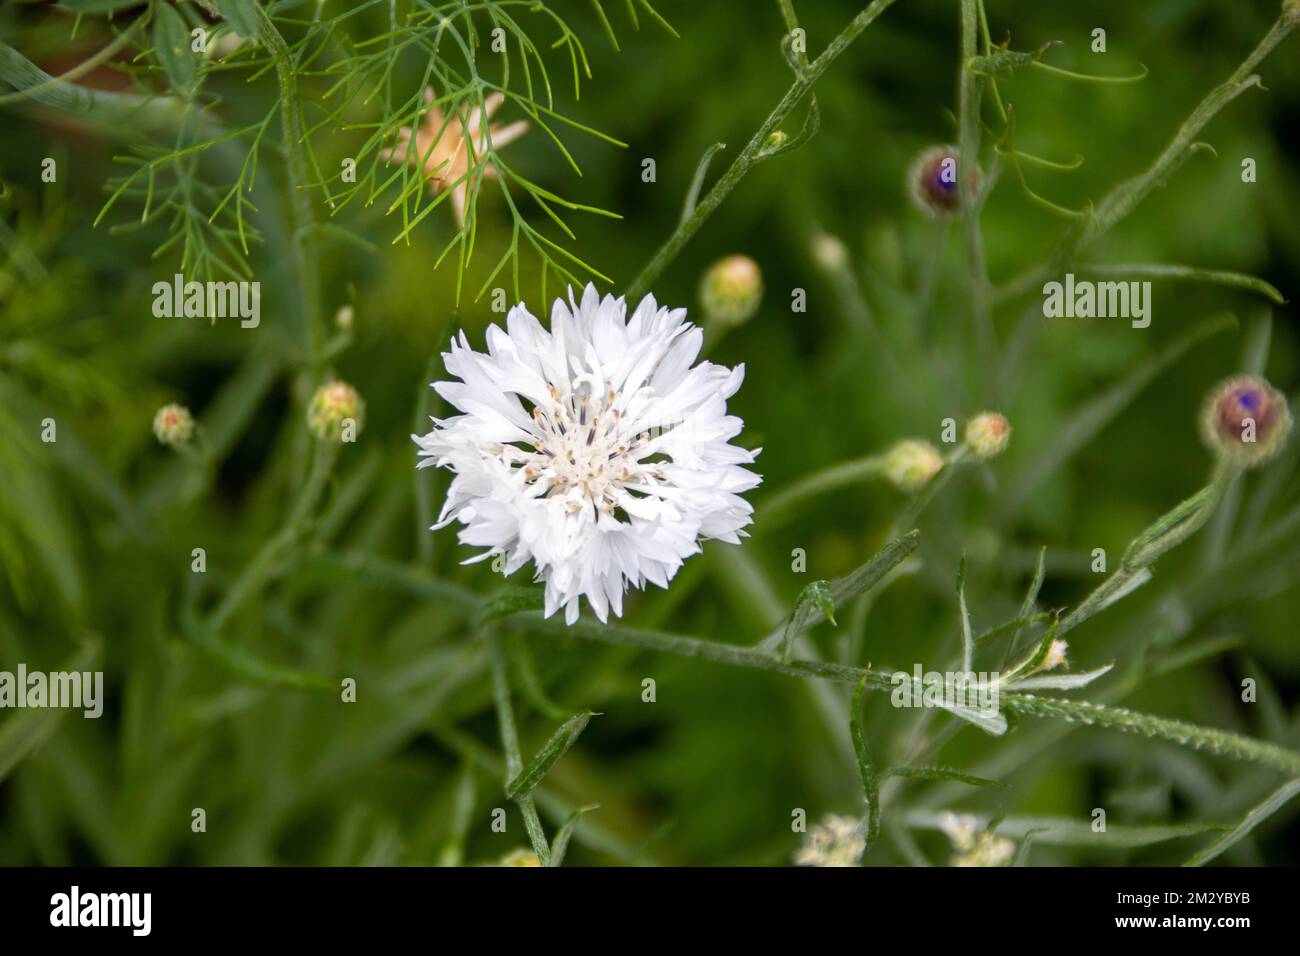 pretty white flower of the cornflower also known as bachelor's button Stock Photo